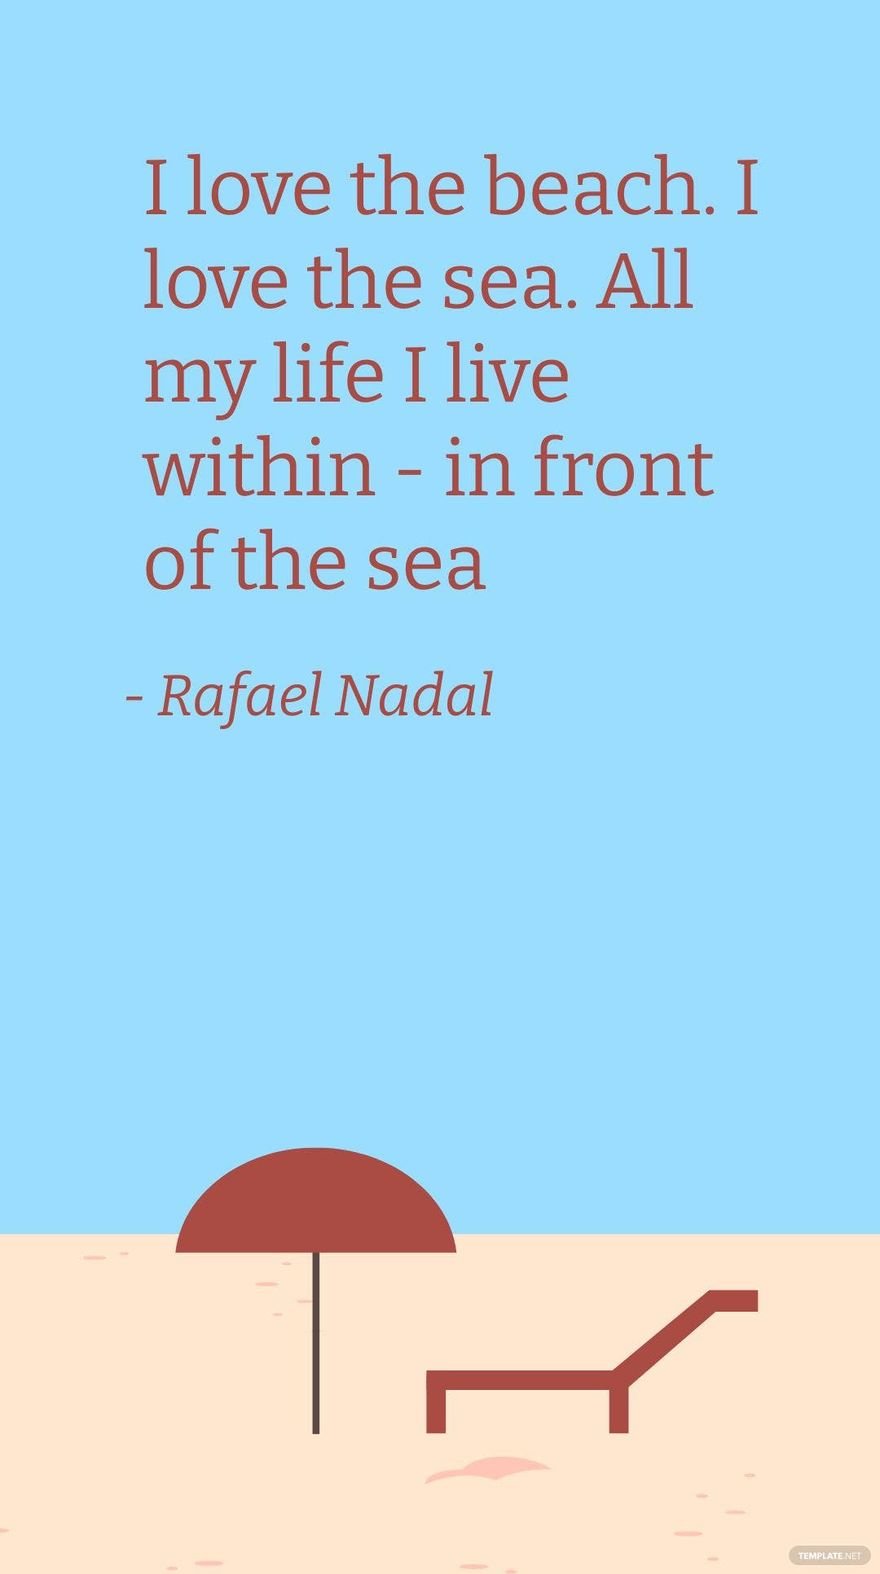 Free Rafael Nadal - I love the beach. I love the sea. All my life I live within - in front of the sea in JPG